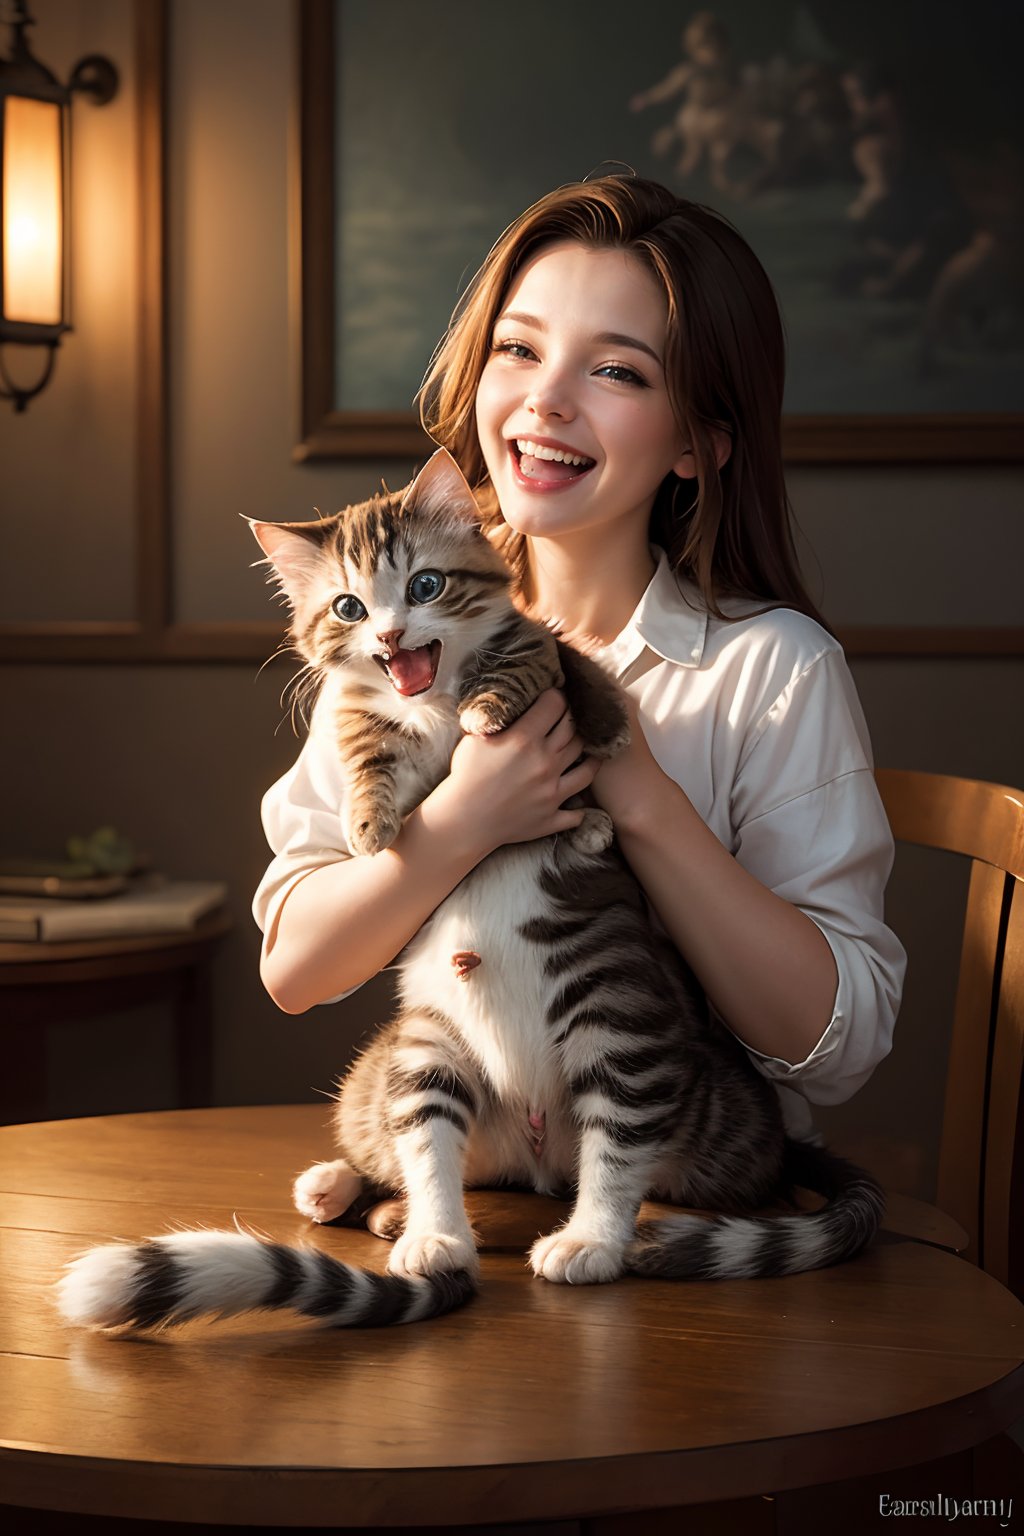 by (((Lori Earley) and  Brian Mashburn ) and  Mark Keathley ) and Evgeny Lushpin, hyperdetailed photography of a cute happy woman holding up two cute kittens while laughing maniacally laughter, dual wielding kittens   